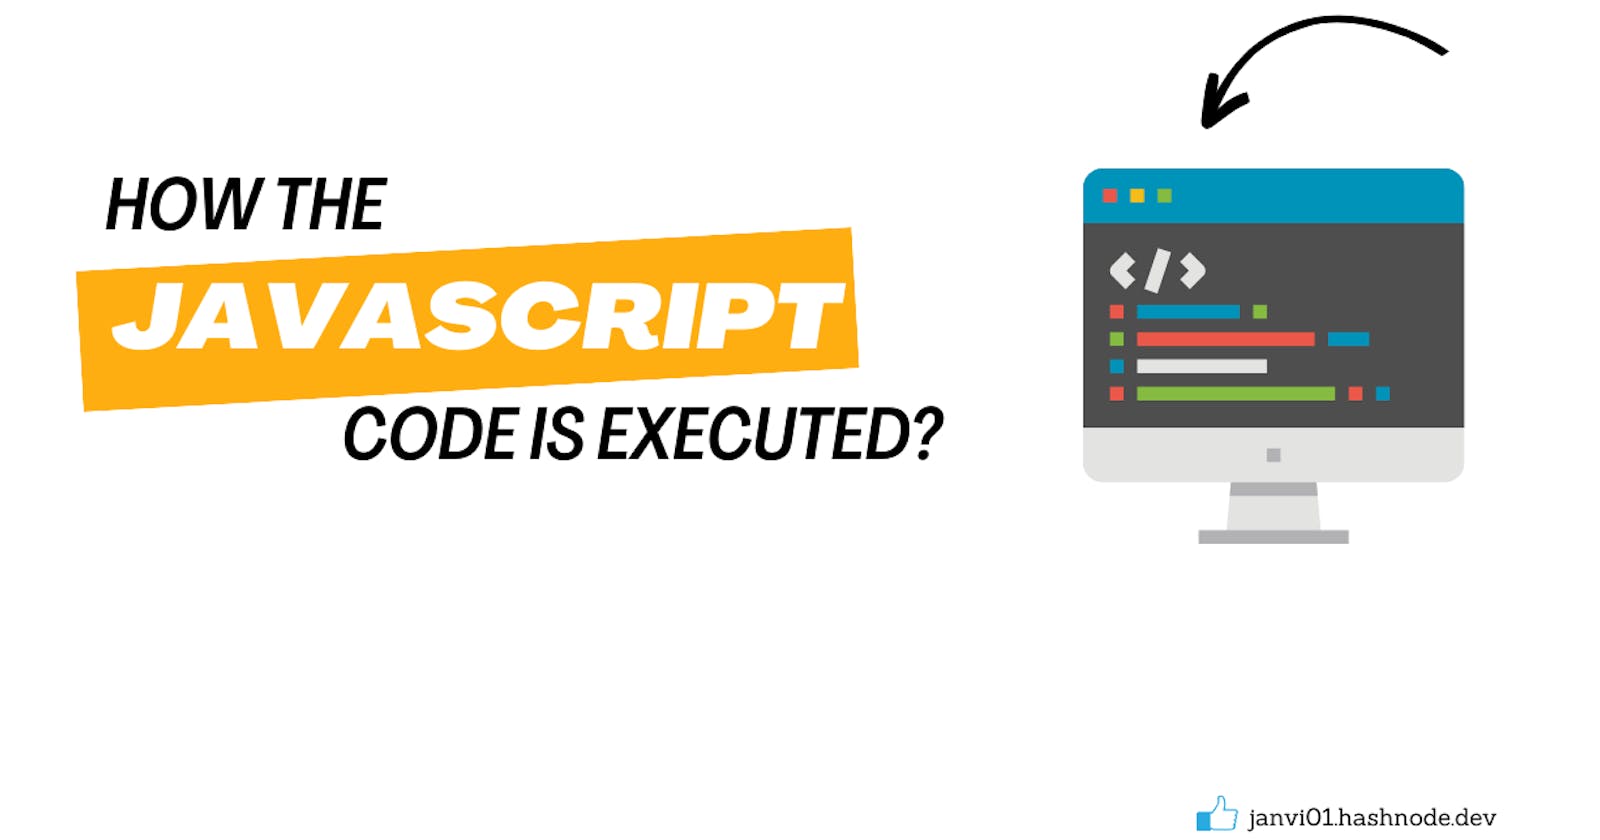 How the JavaScript code is executed?